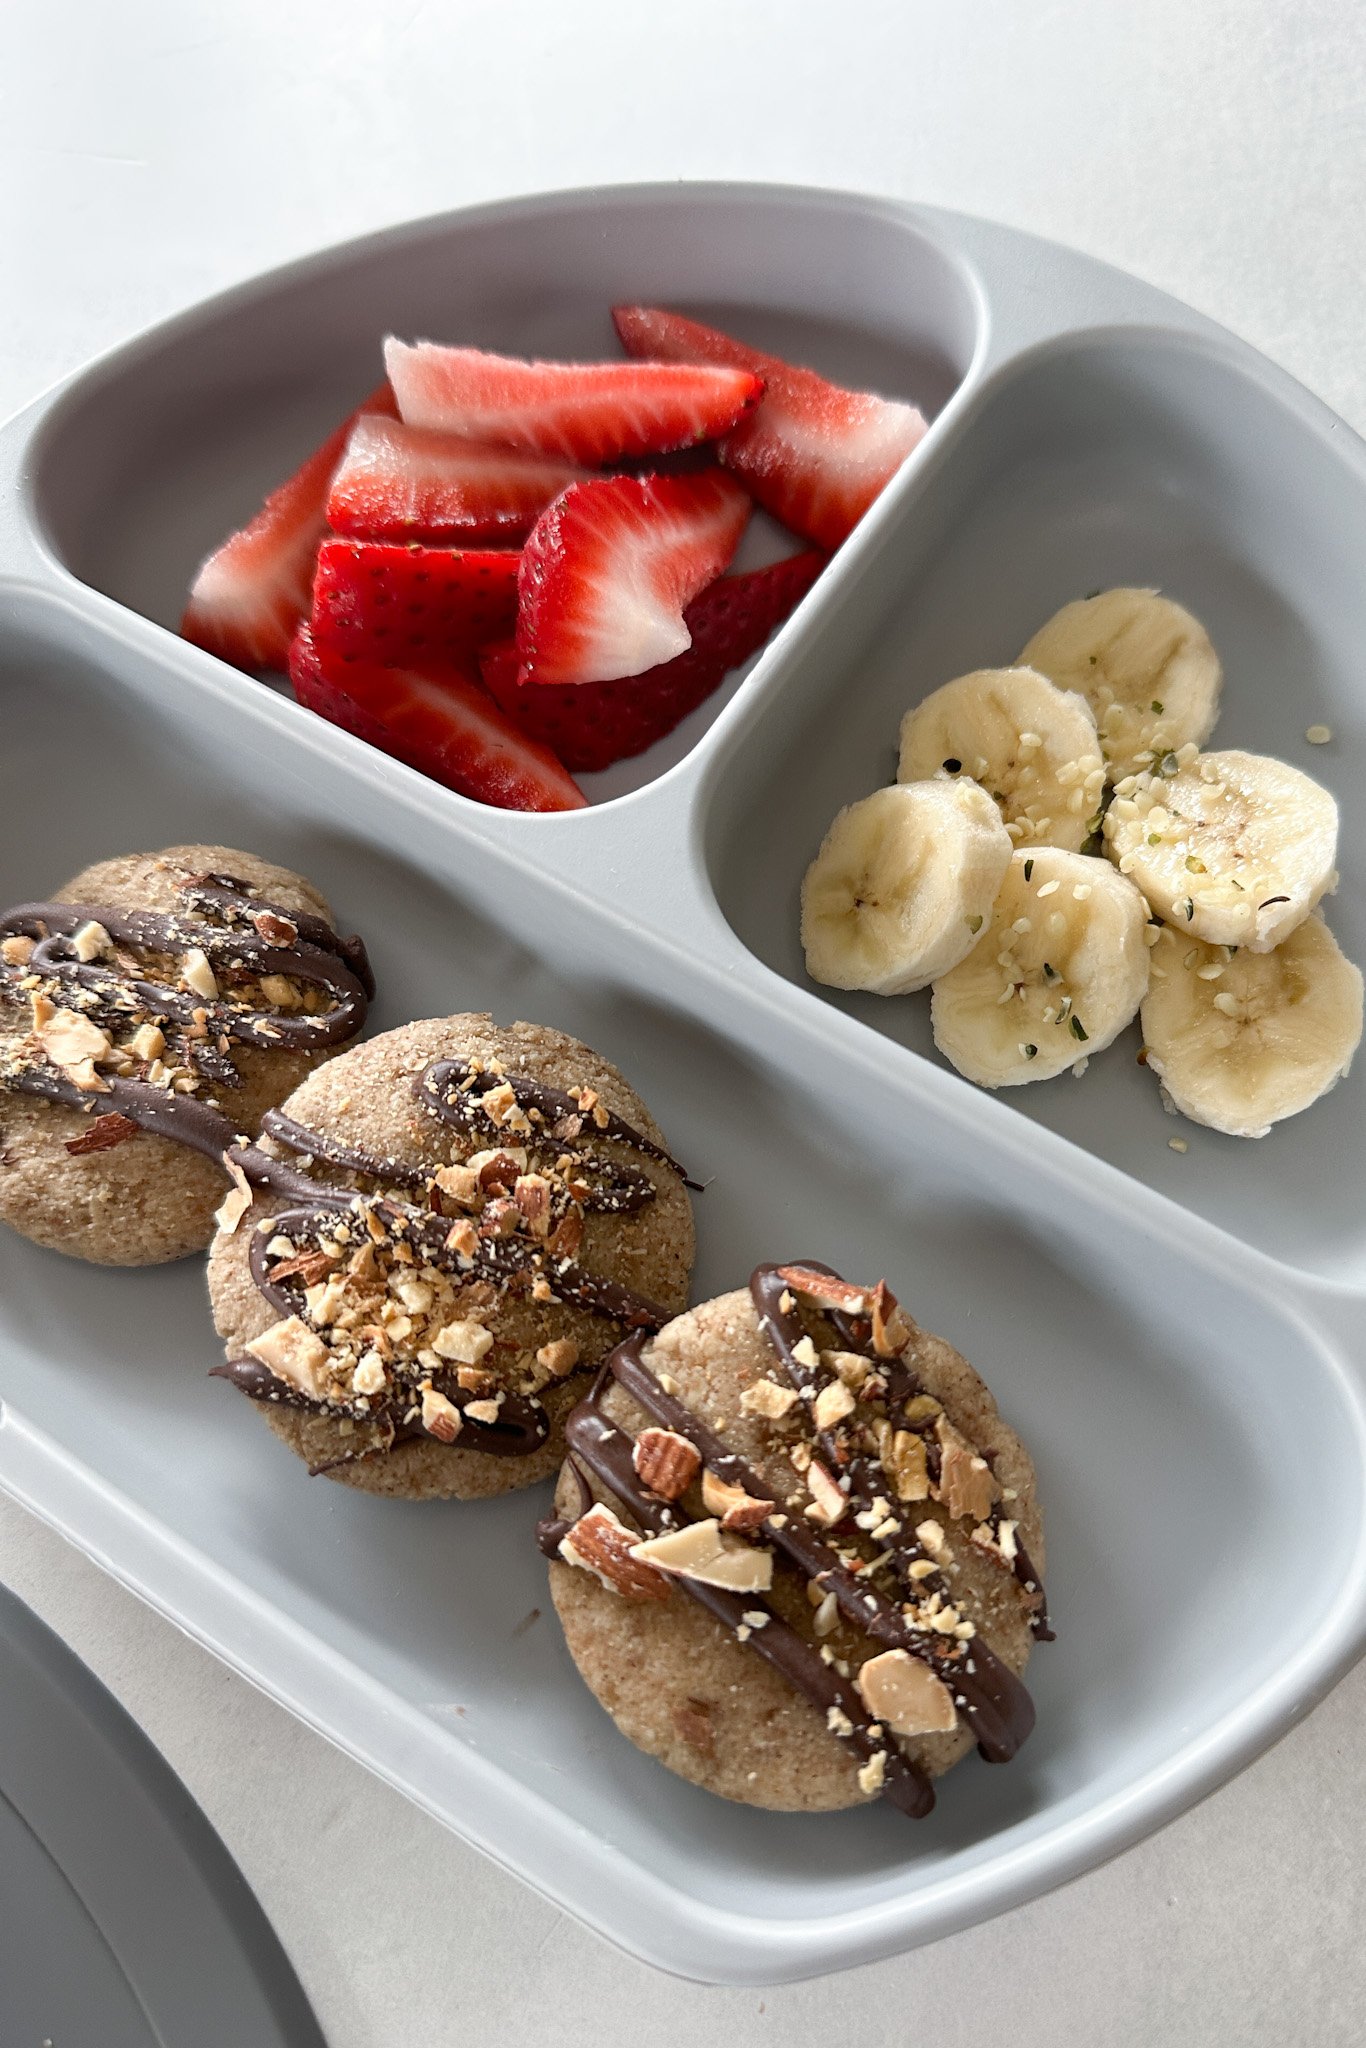 Banana bread cookies served with strawberries.